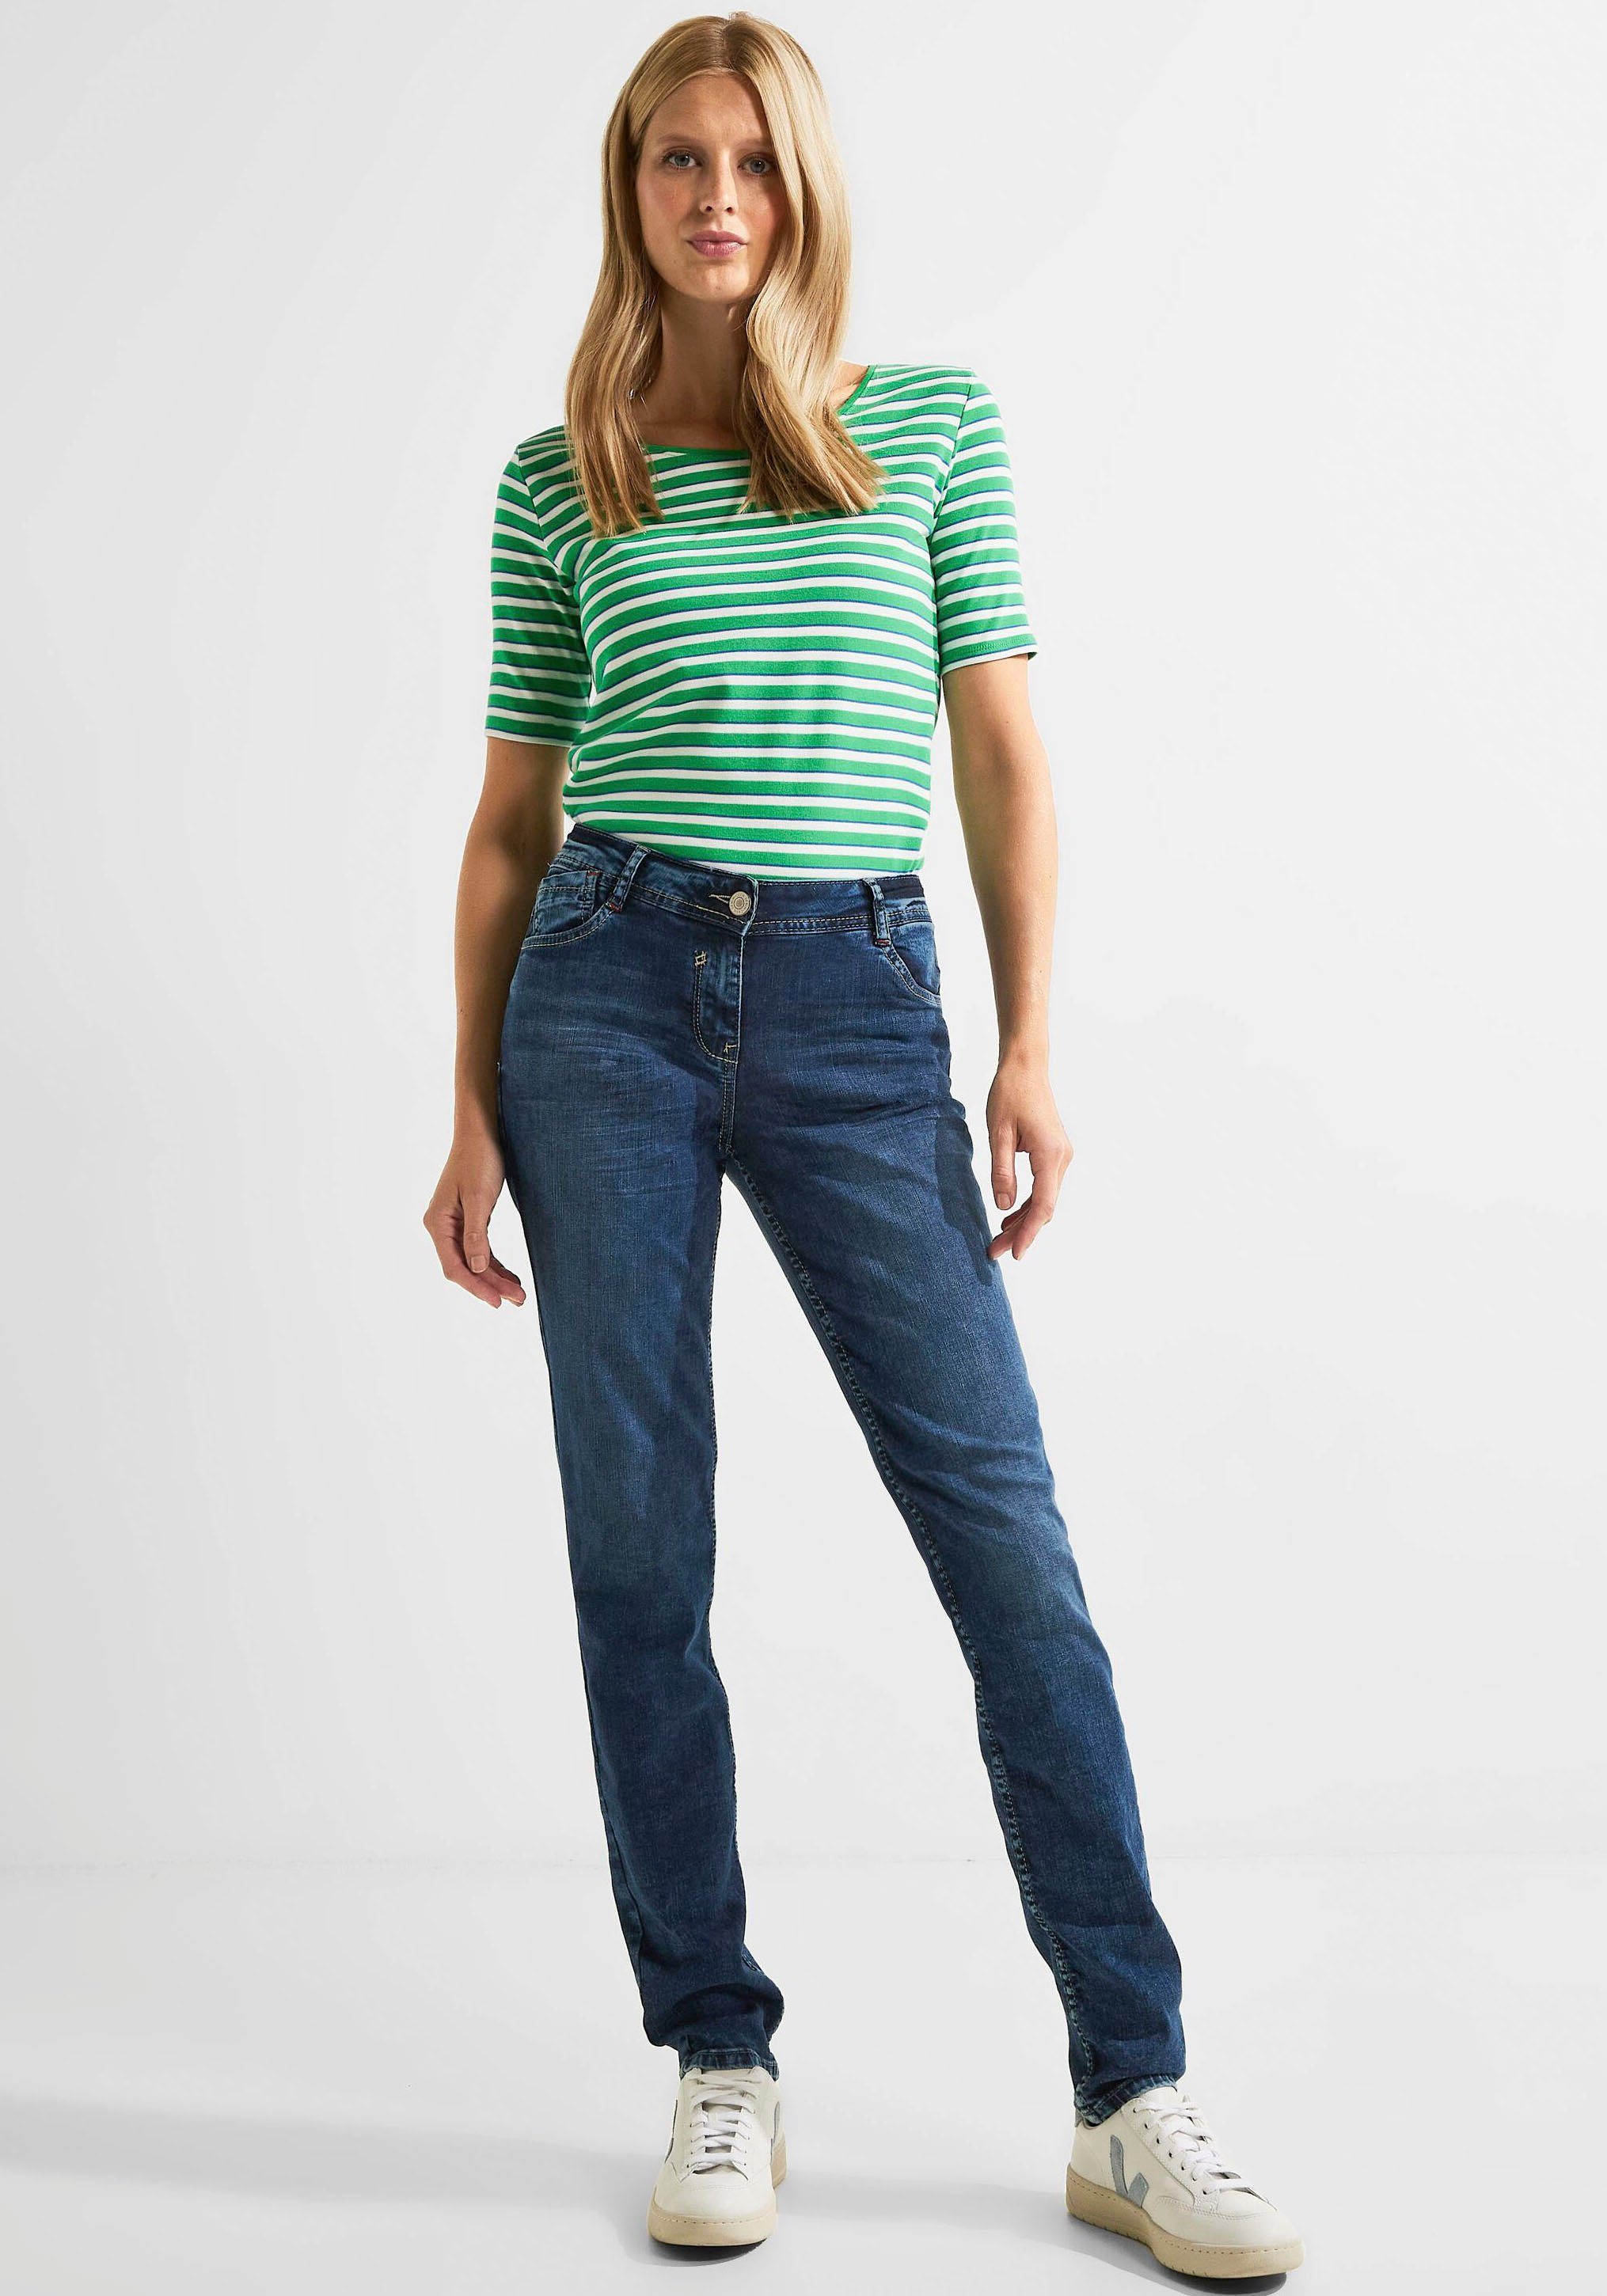 Scarlett Style Cecil im Loose-fit-Jeans